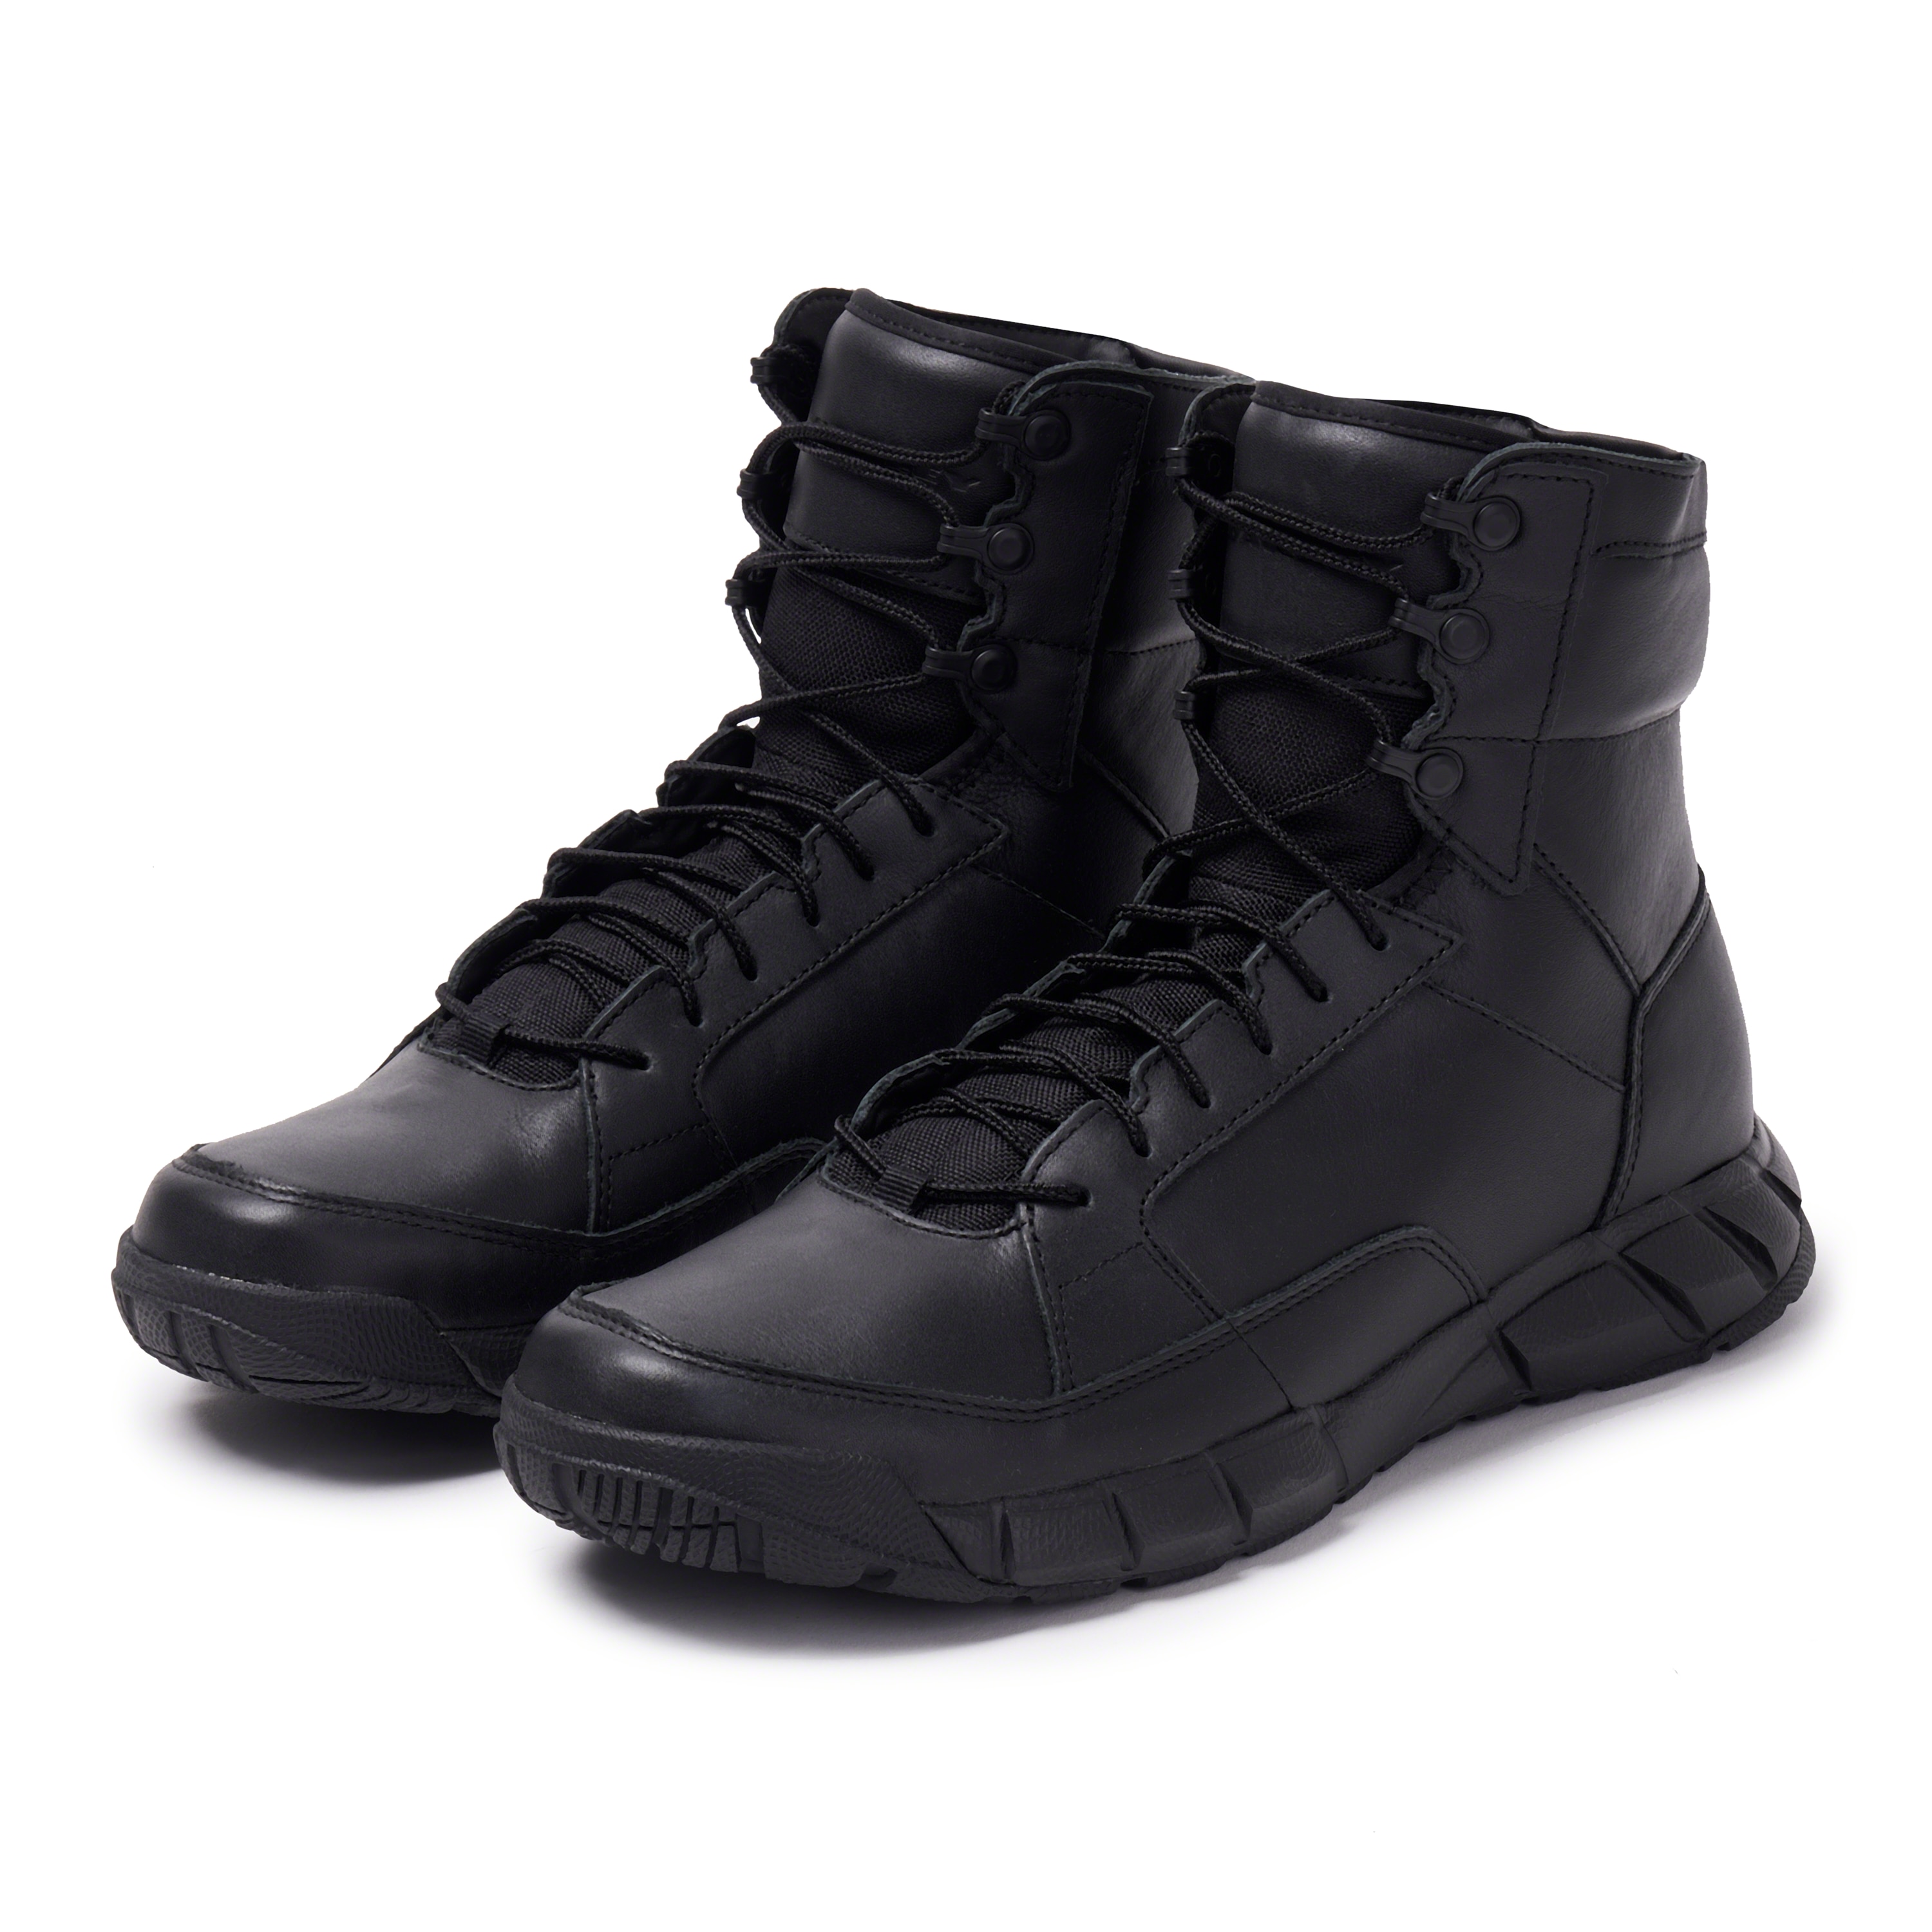 oakley army boots